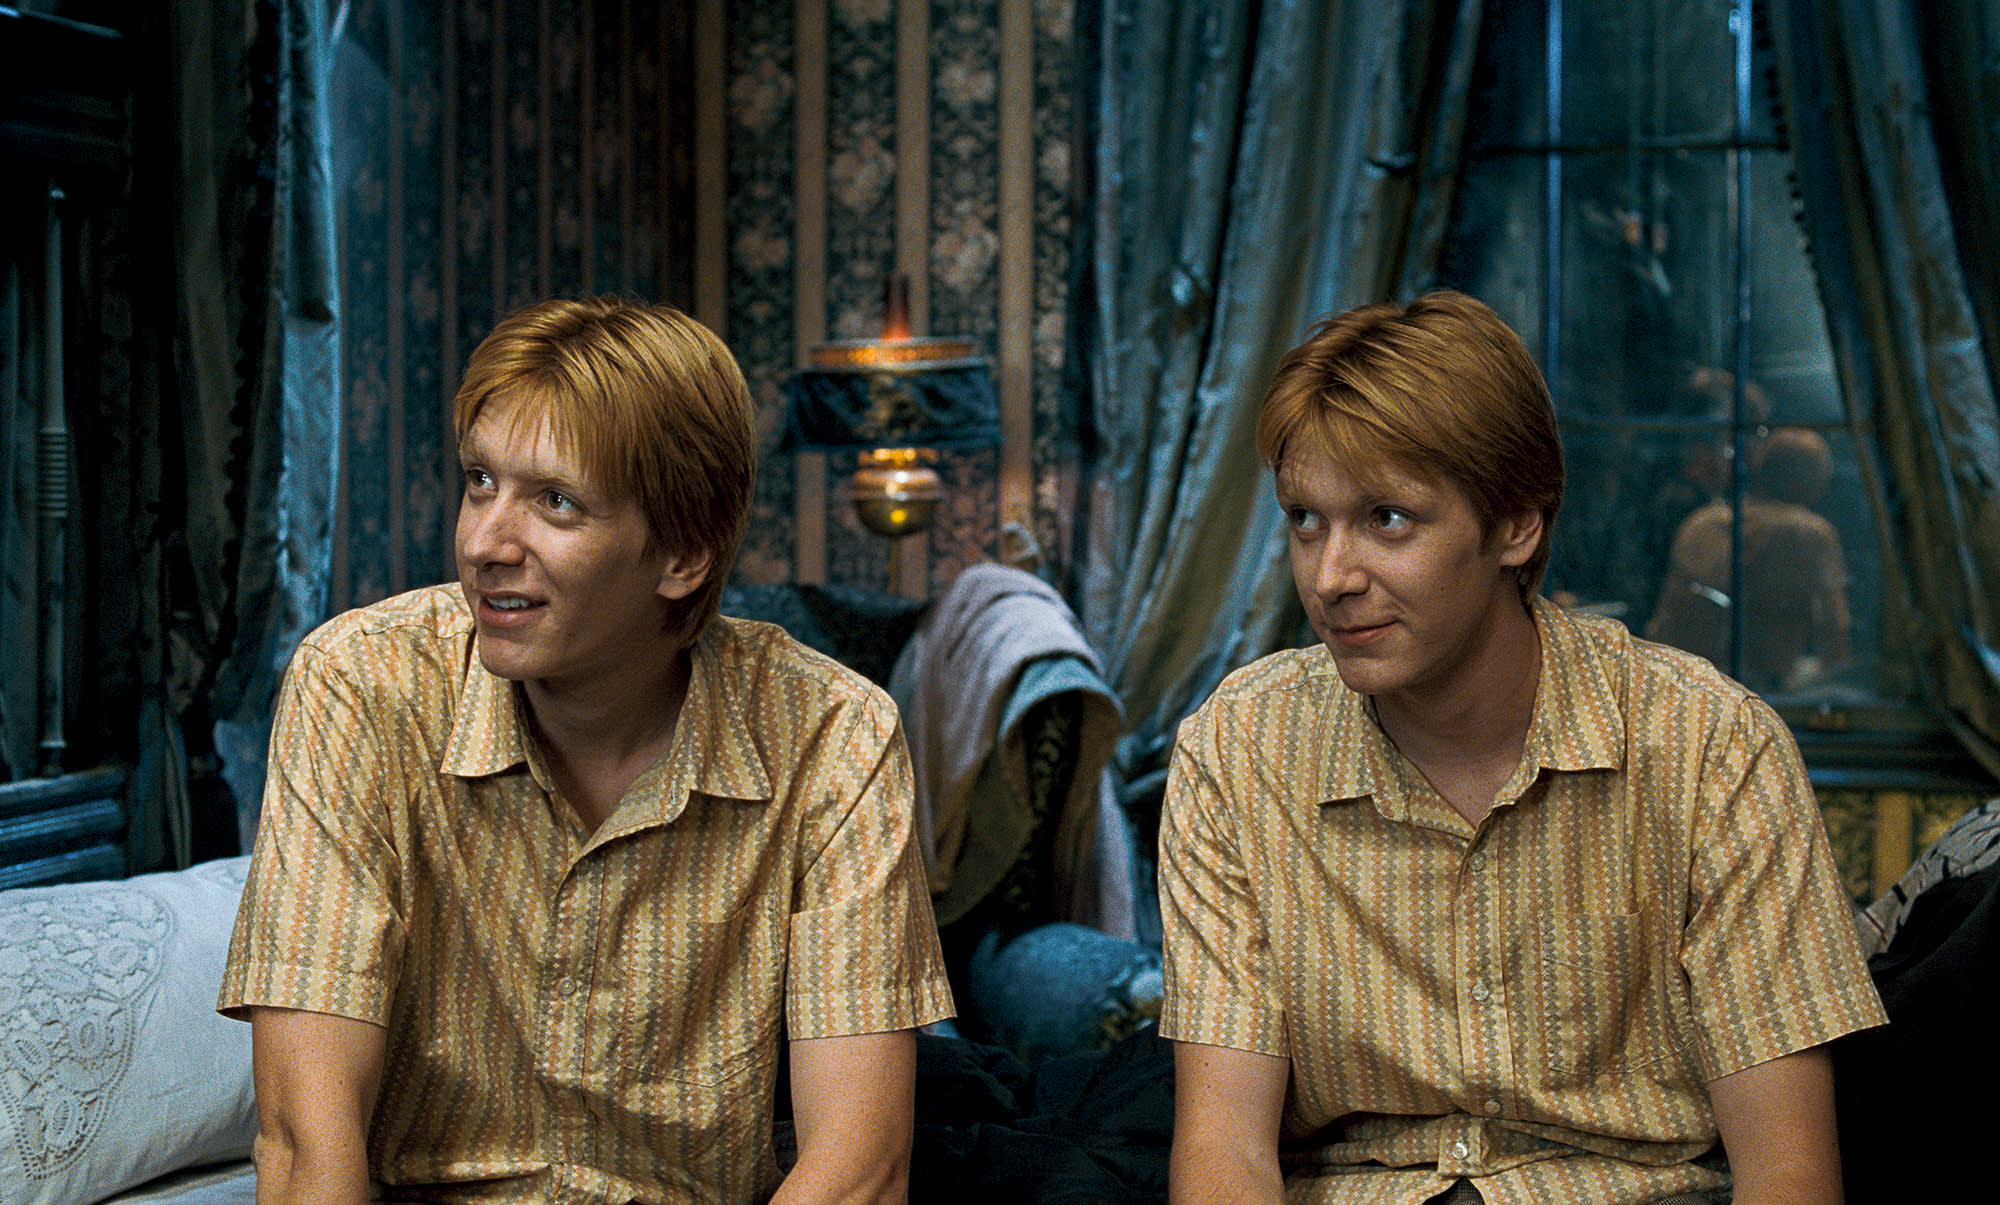 Fred and George sat down in Grimmauld place, wearing matching shirts and smirking.